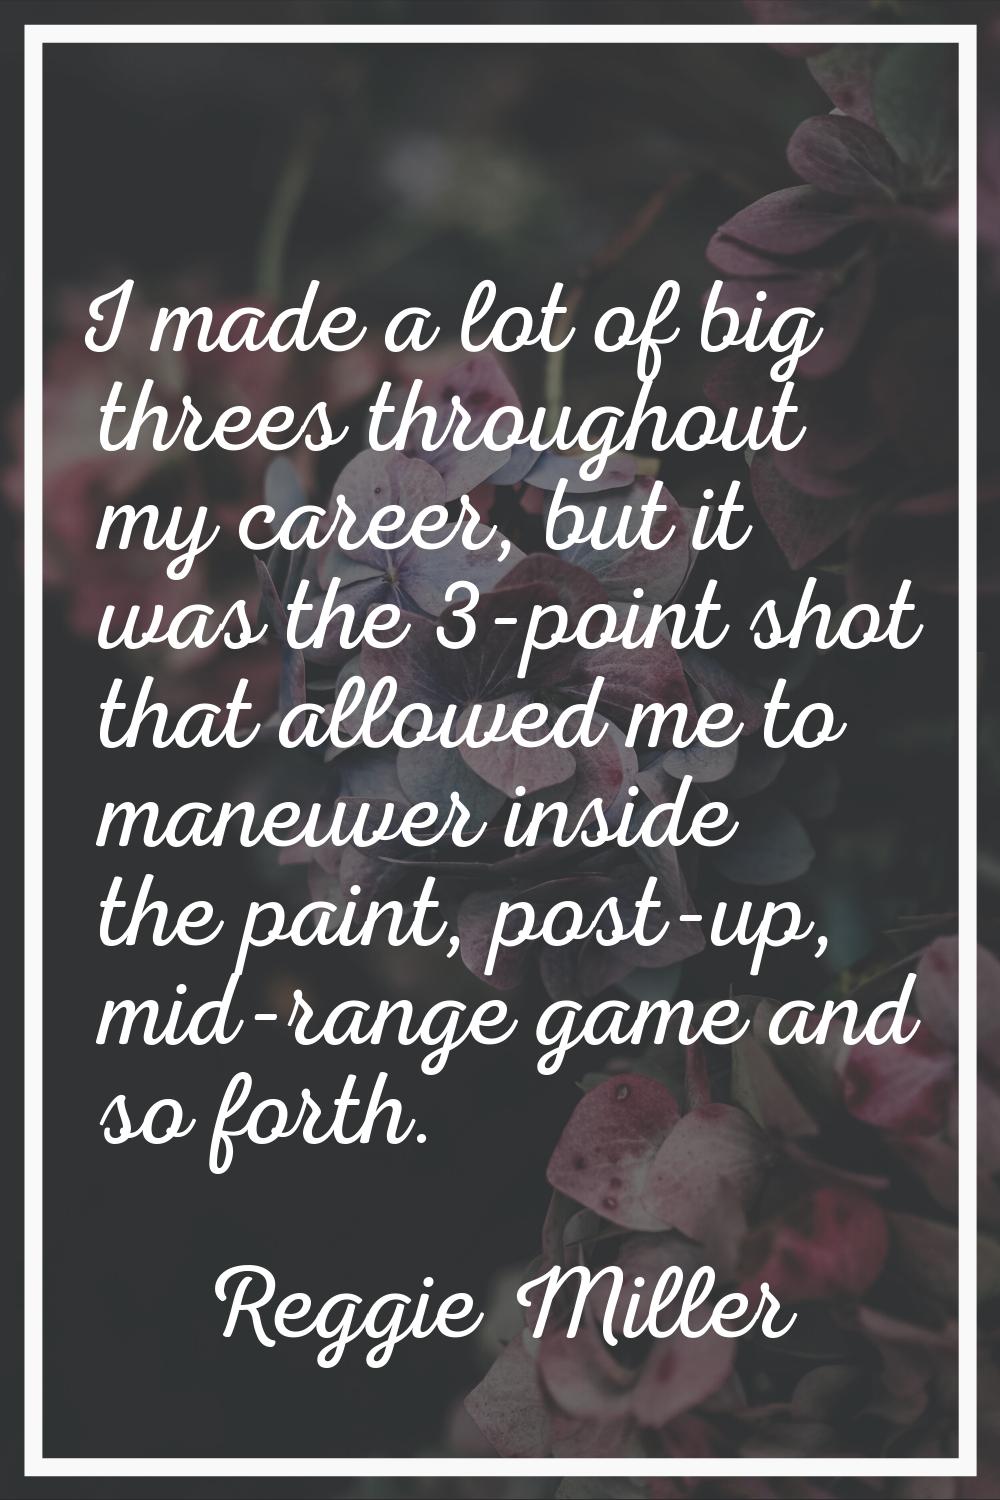 I made a lot of big threes throughout my career, but it was the 3-point shot that allowed me to man